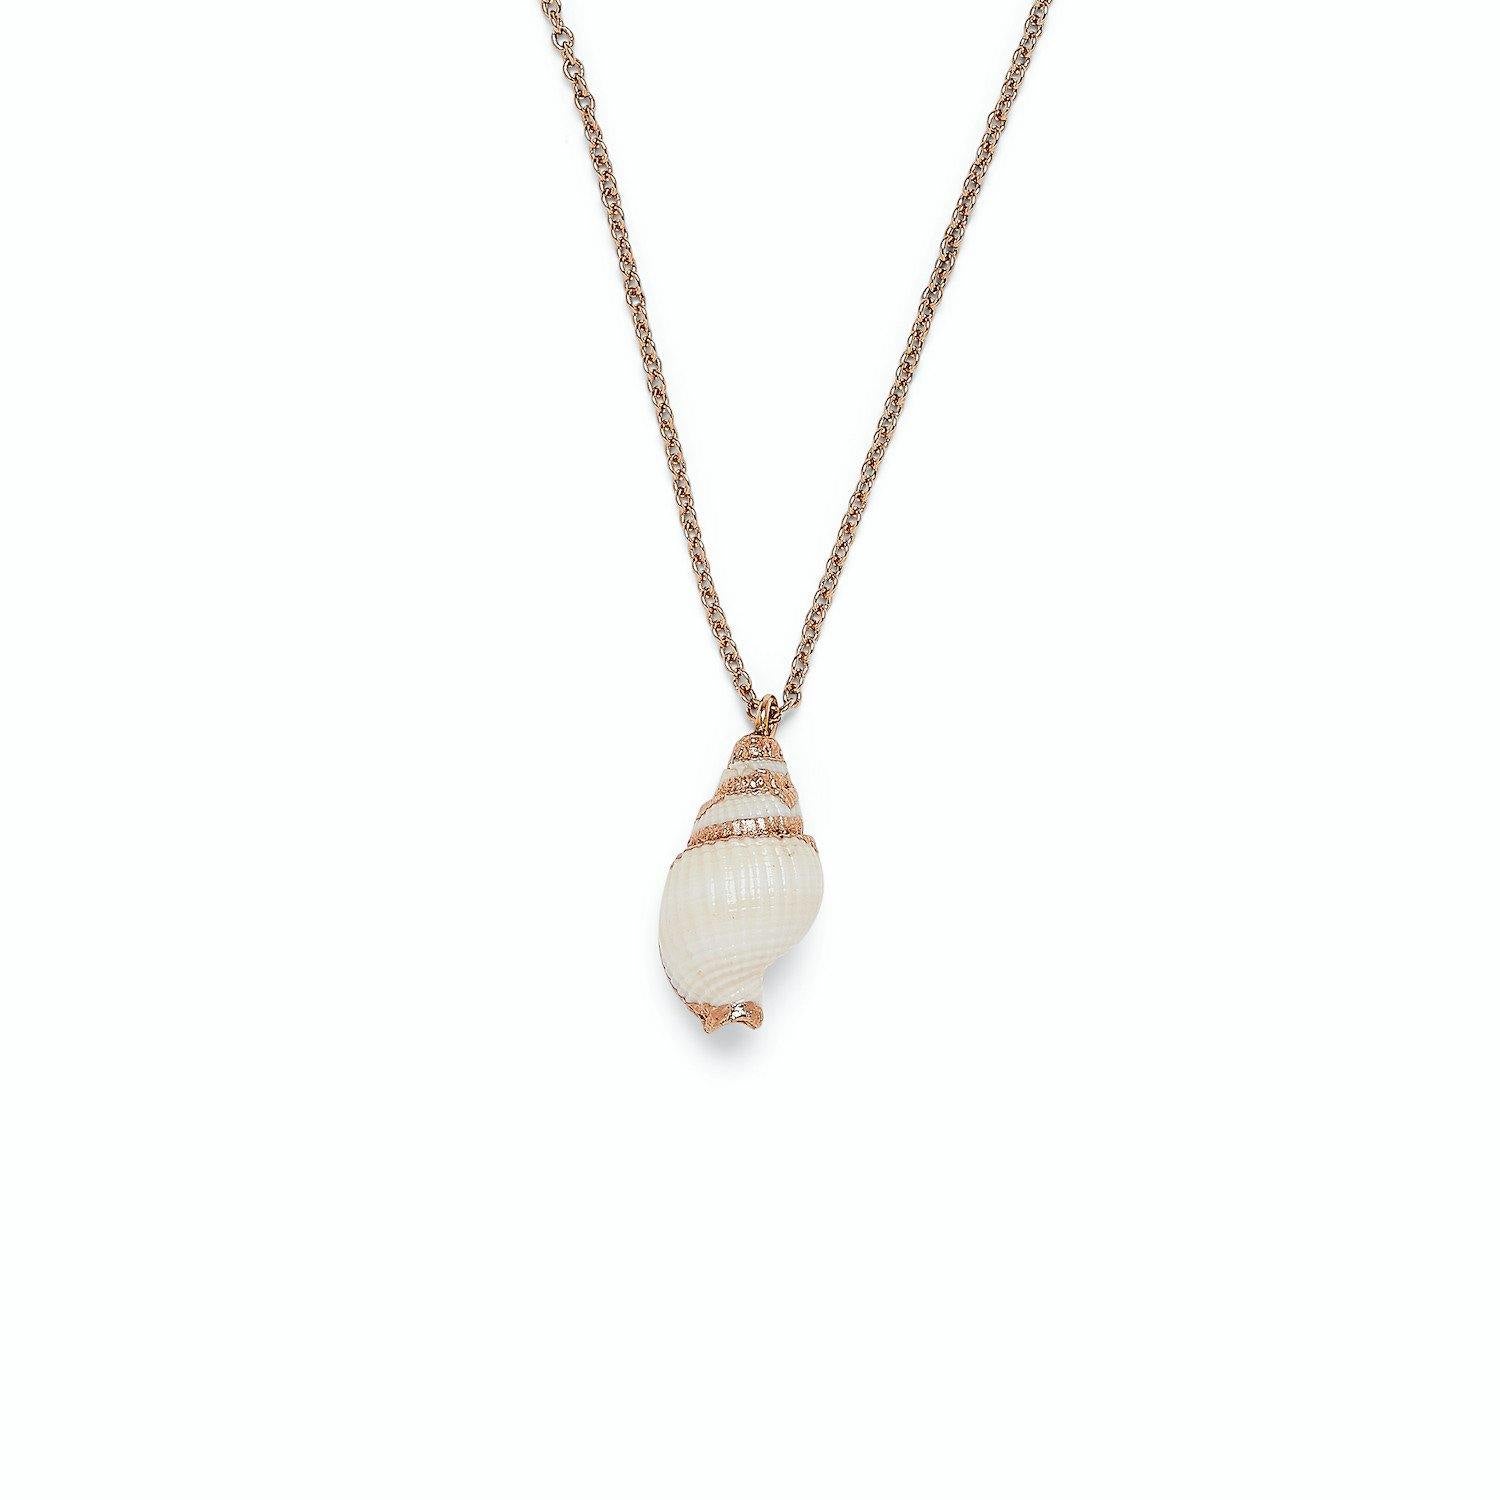 Summer 2021 Necklaces - The Salty Mare